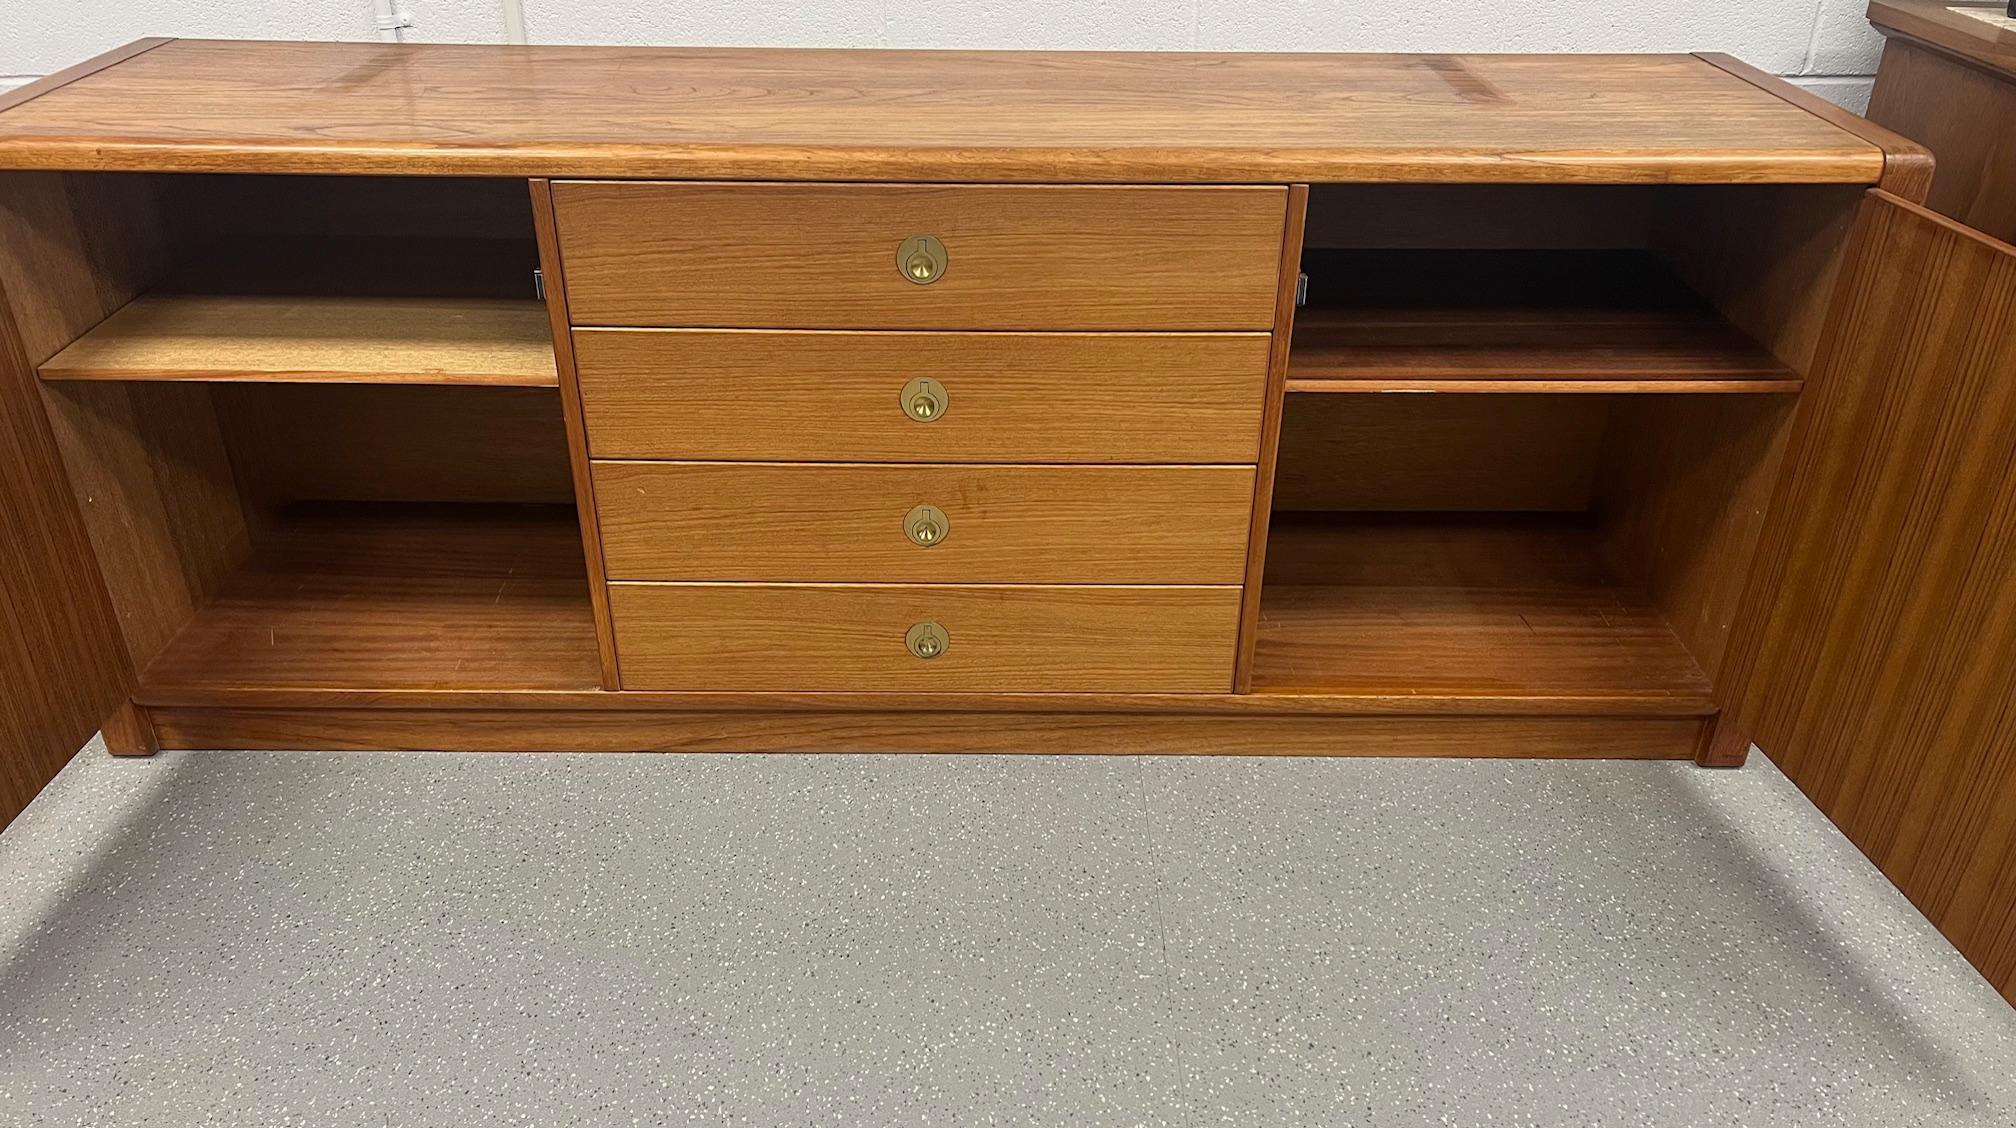 This beautiful midcentury Danish modern teak credenza buffet is the perfect addition to any home. Crafted by D-Scan in their Captain Line, this piece boasts a rich brown color and is made from high-quality teak material. Having two cabinets with